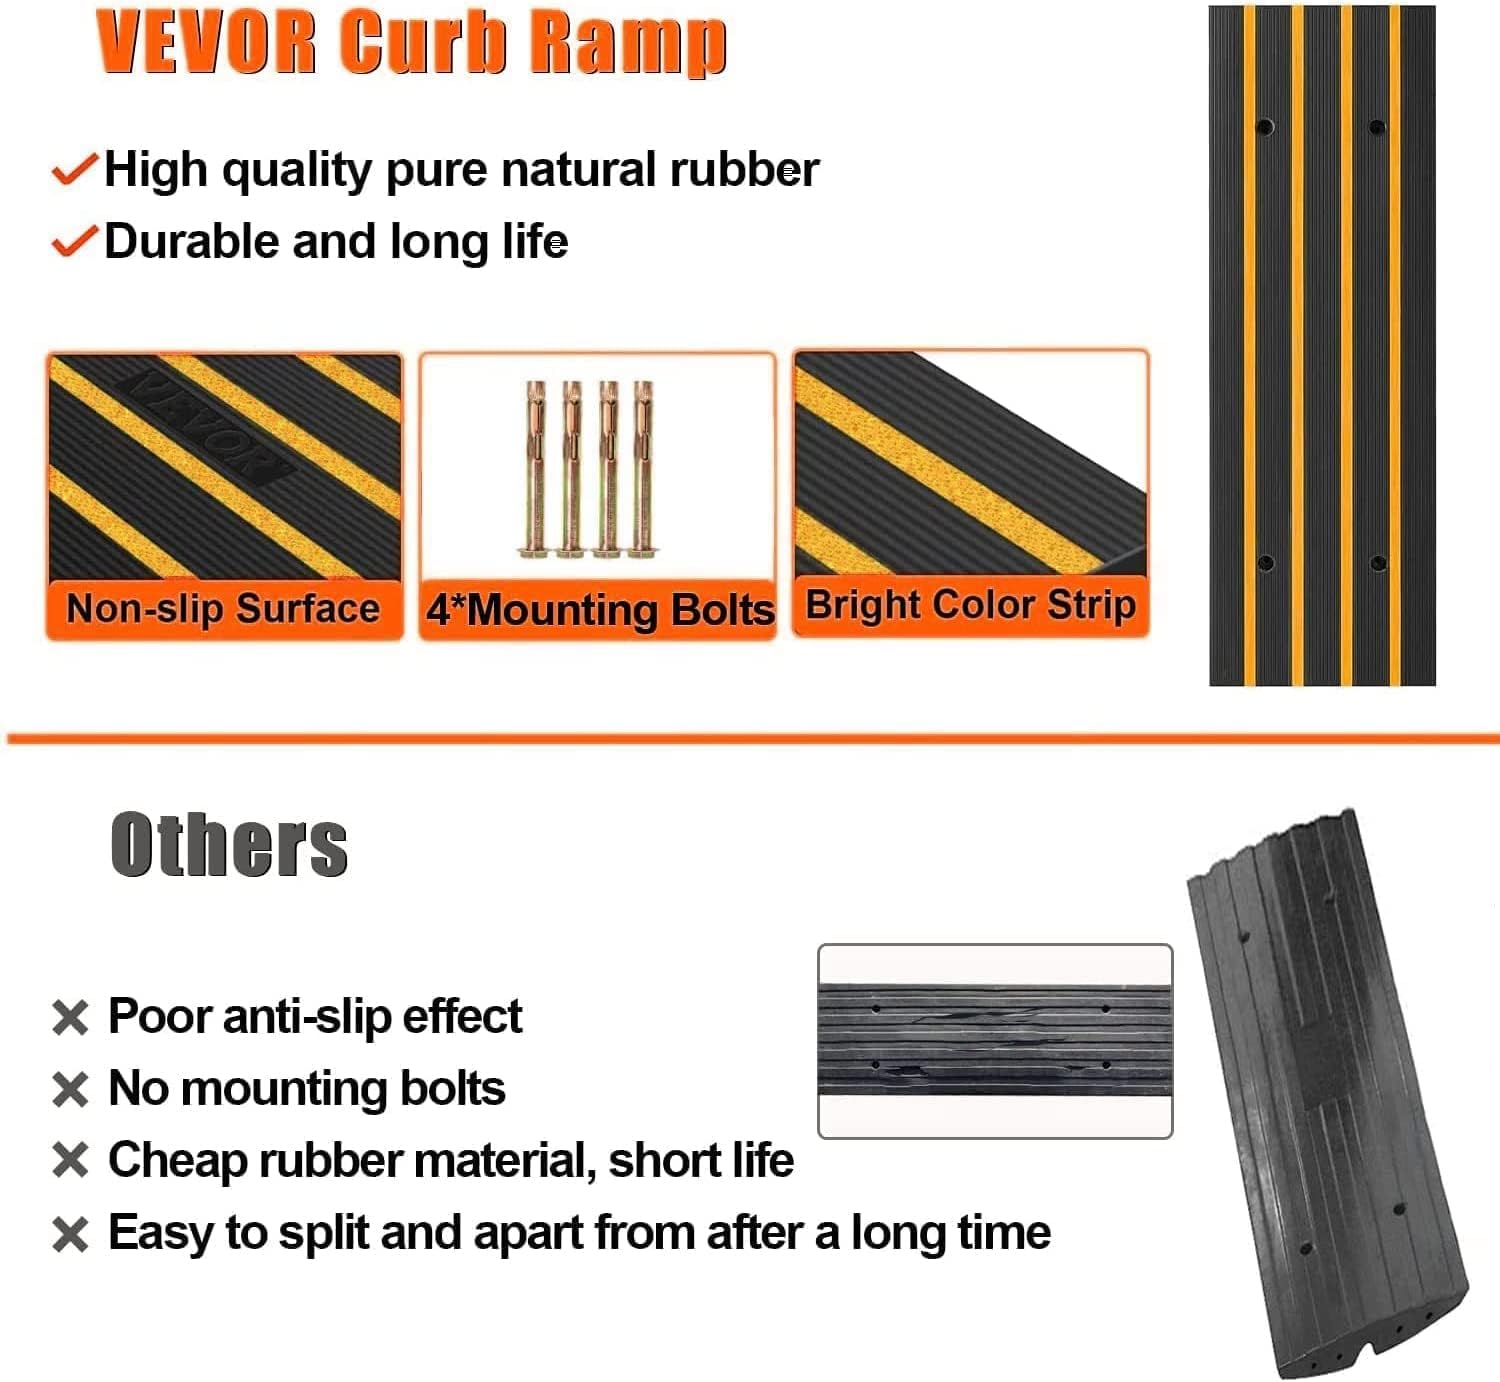 VEVOR 2 Pack Rubber Curb Ramps for Driveway, Heavy Duty Car Ramp 2.5 Inch - $85